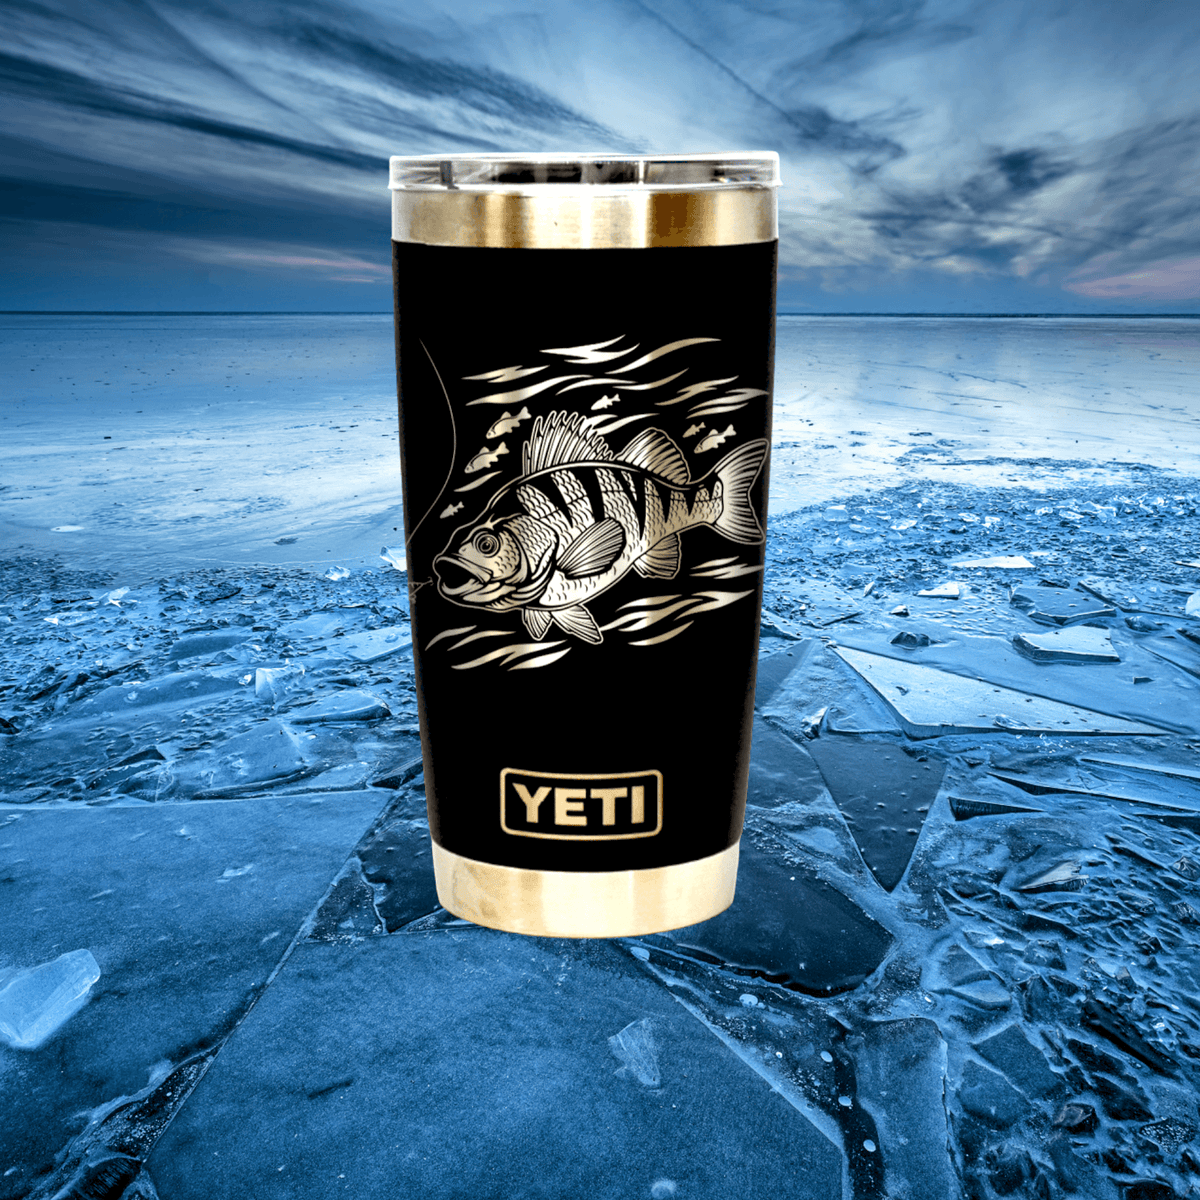 https://cdn.shopify.com/s/files/1/0606/5497/7184/products/wind-river-outpost-perch-yeti-PhotoRoom_2_1200x.png?v=1690330715